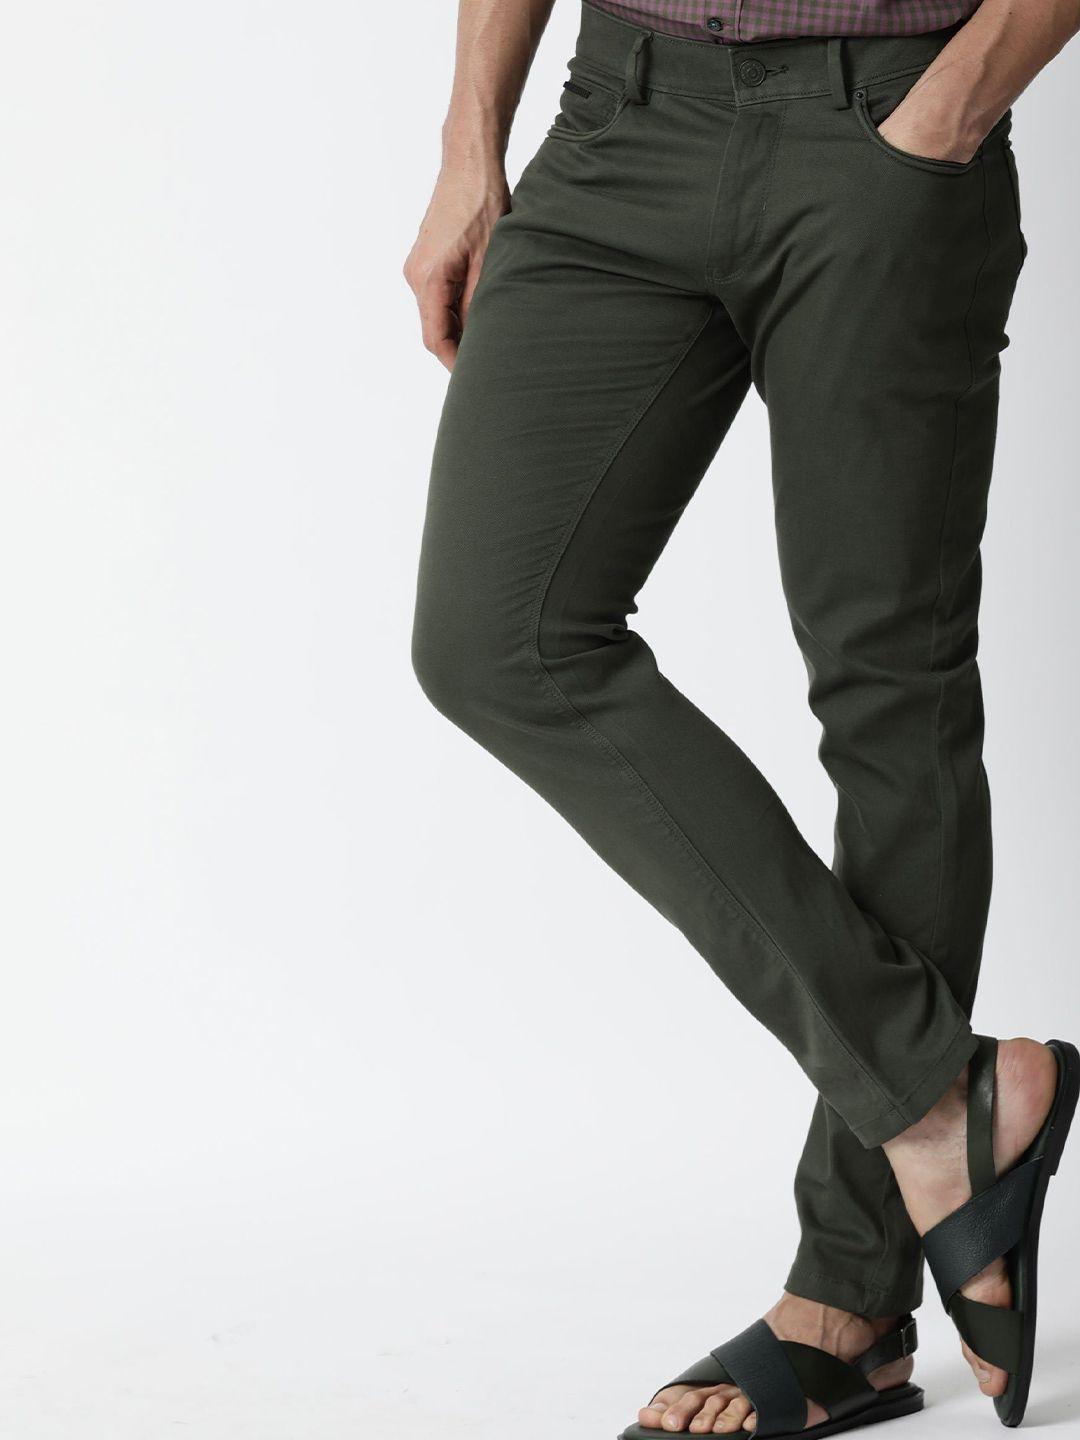 rare-rabbit-men-olive-green-slim-fit-chinos-trousers